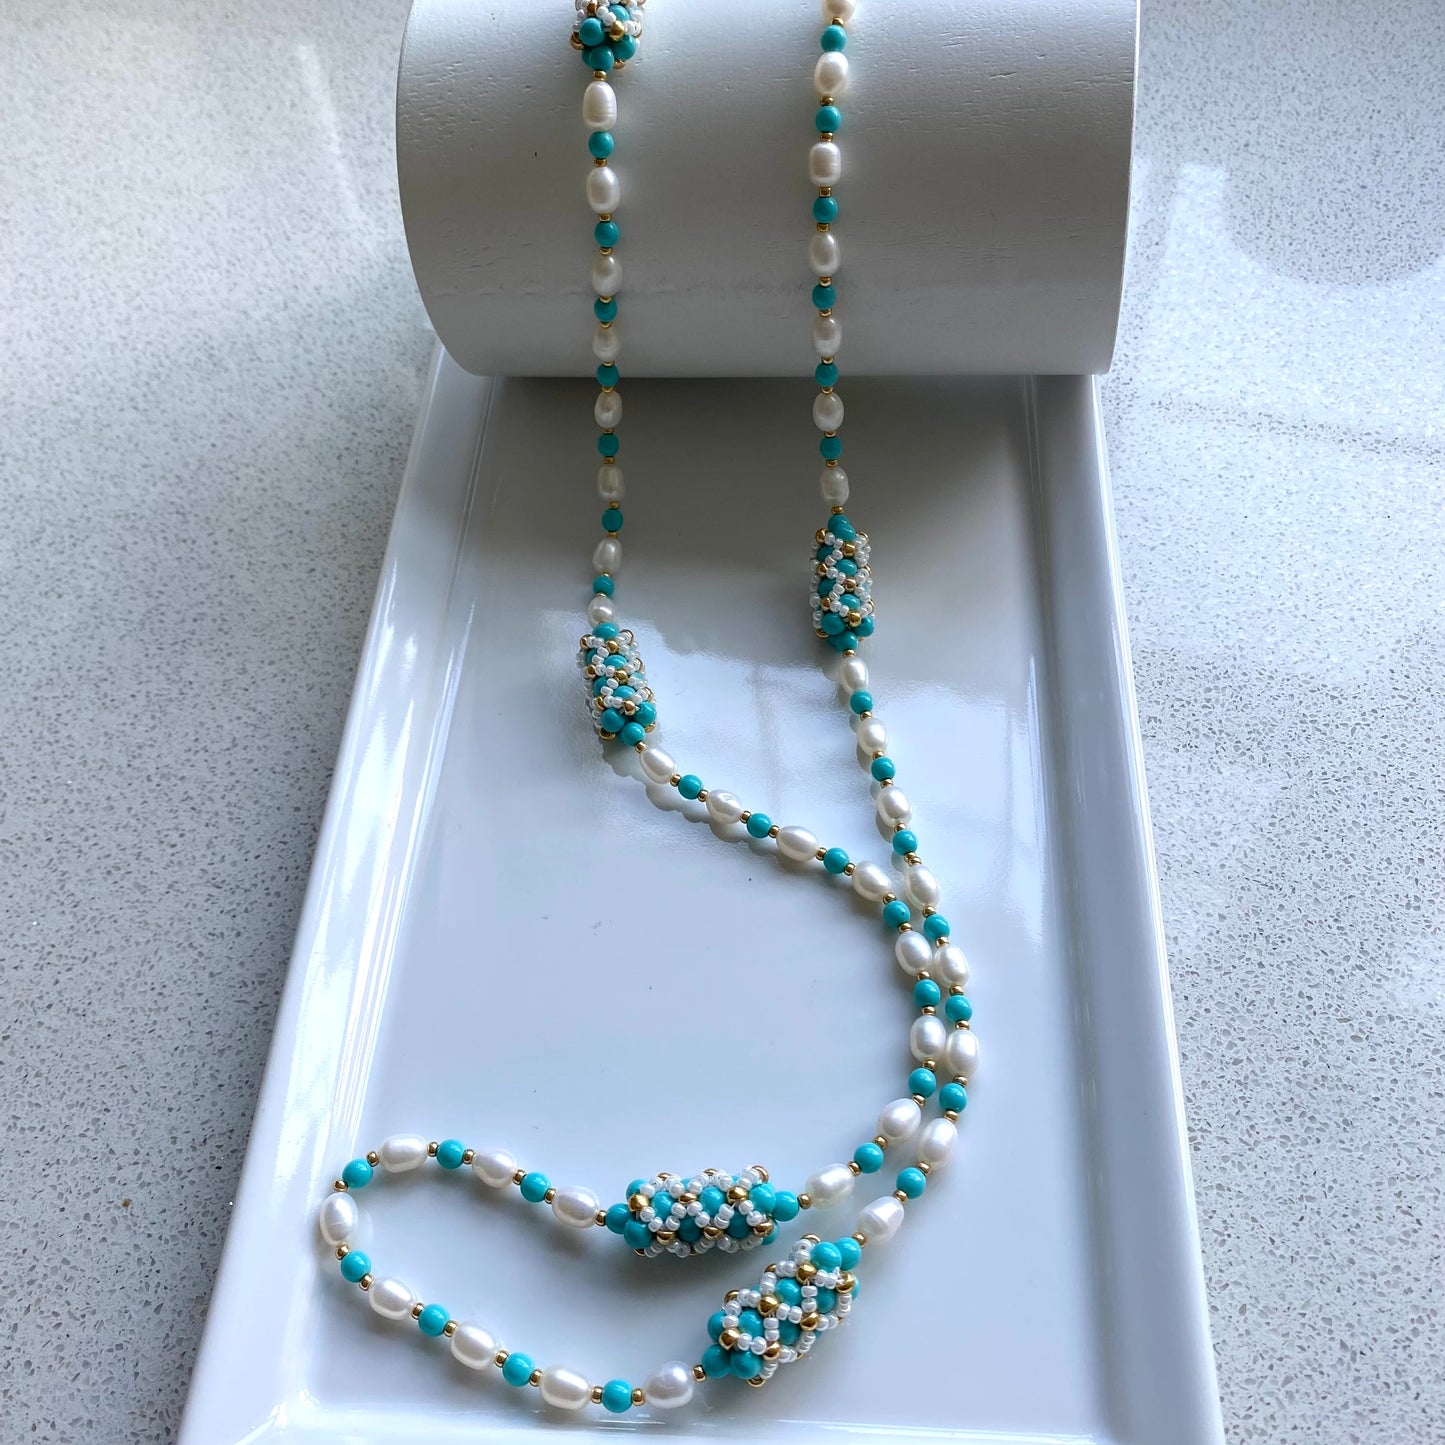 Handbeaded pearl and turquoise pearl statement necklace